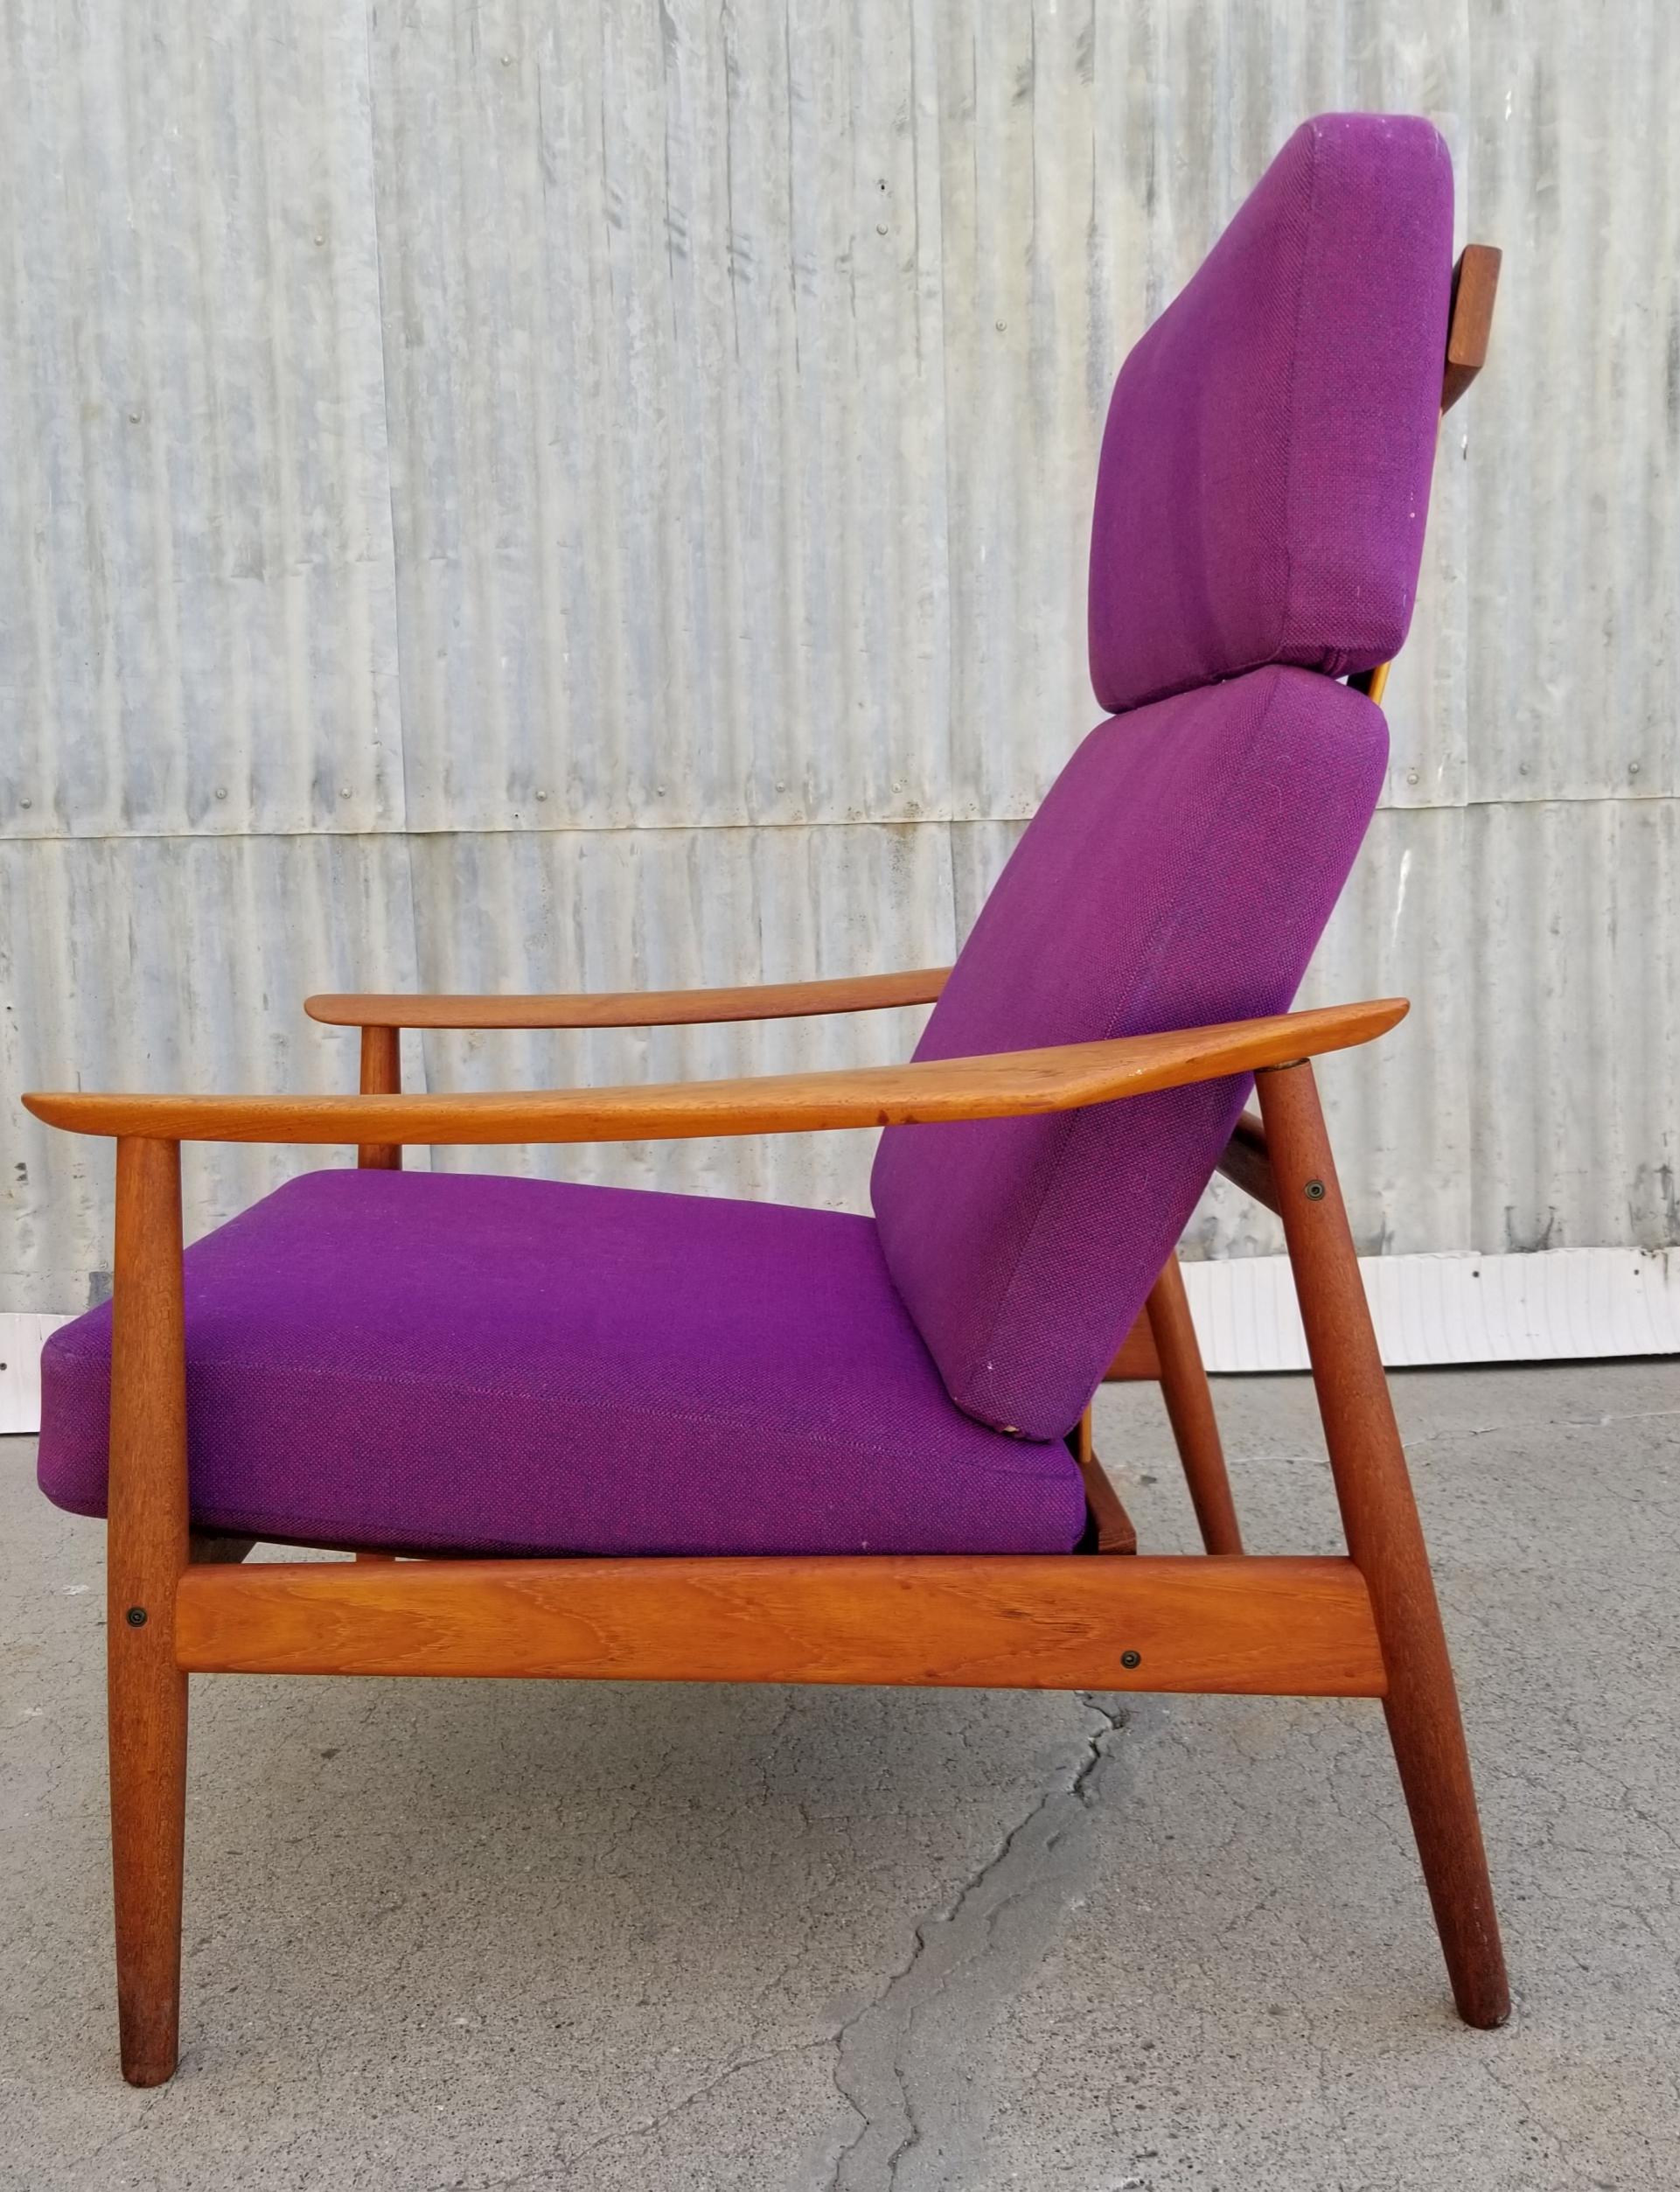 A fine, original example of Arne Vodder's FD 164 adjustable, high back teak lounge chair. Exceptional original vintage condition with original finish and original fabric. Beautiful glow to patina on finish. Retains France & Son and John Stuart